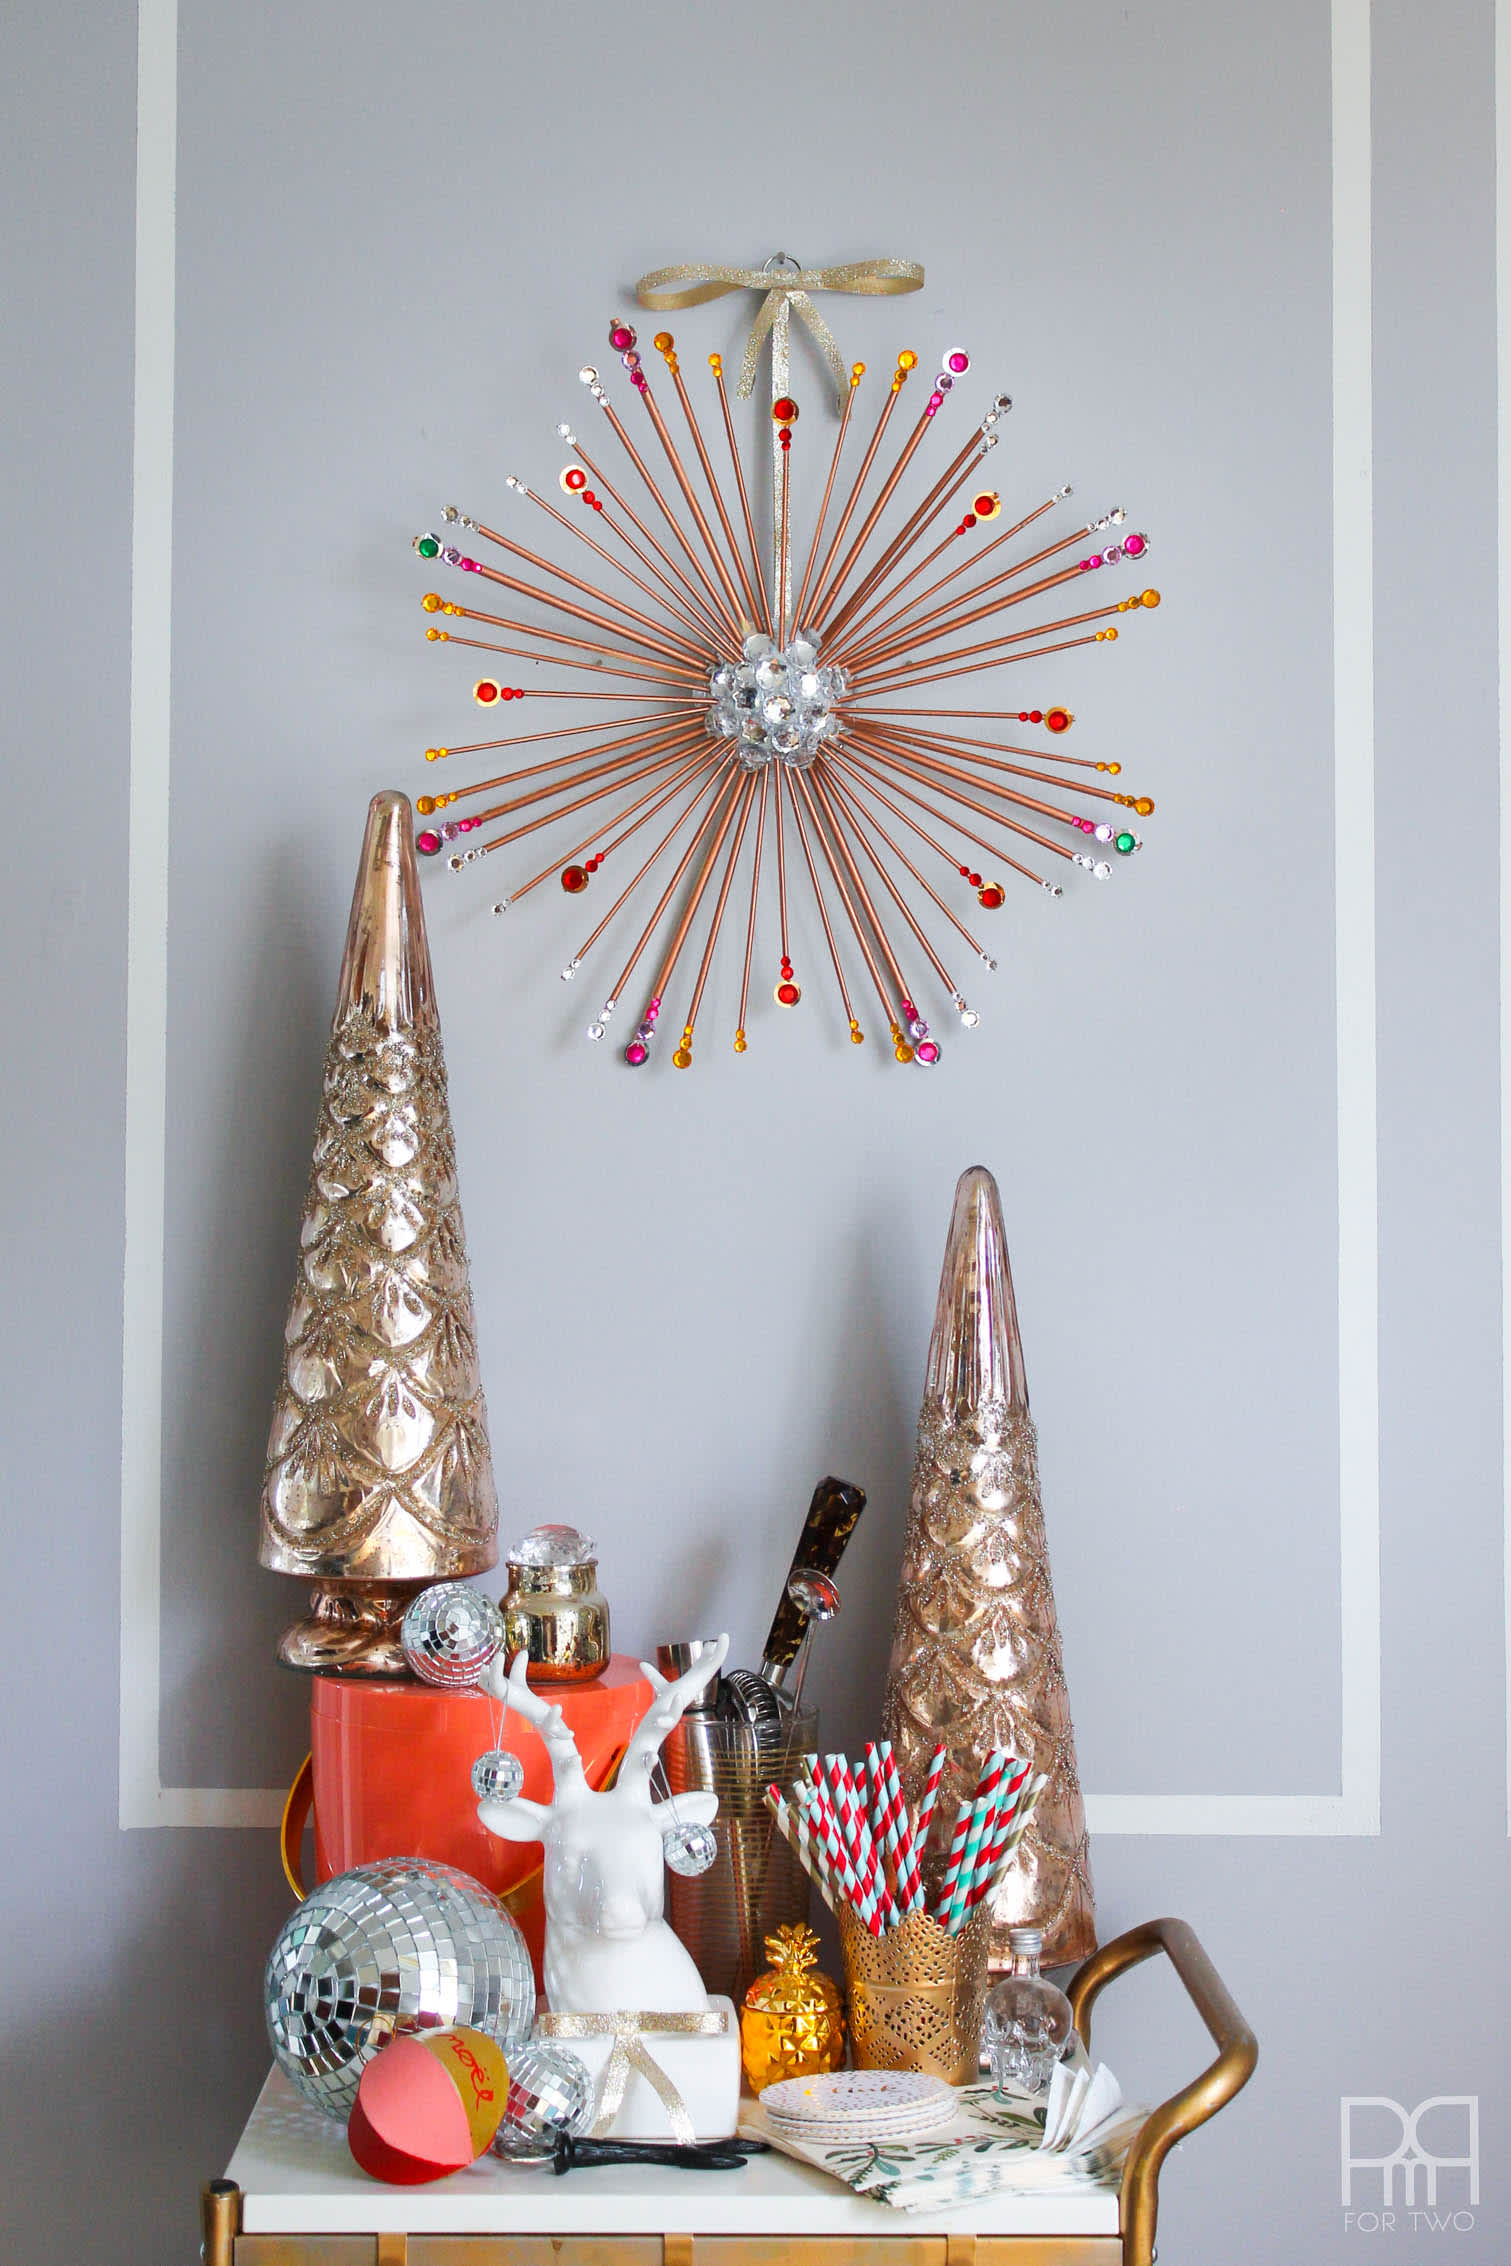 Fab DIY Mod Starburst Tree Topper with Pipe Cleaners!